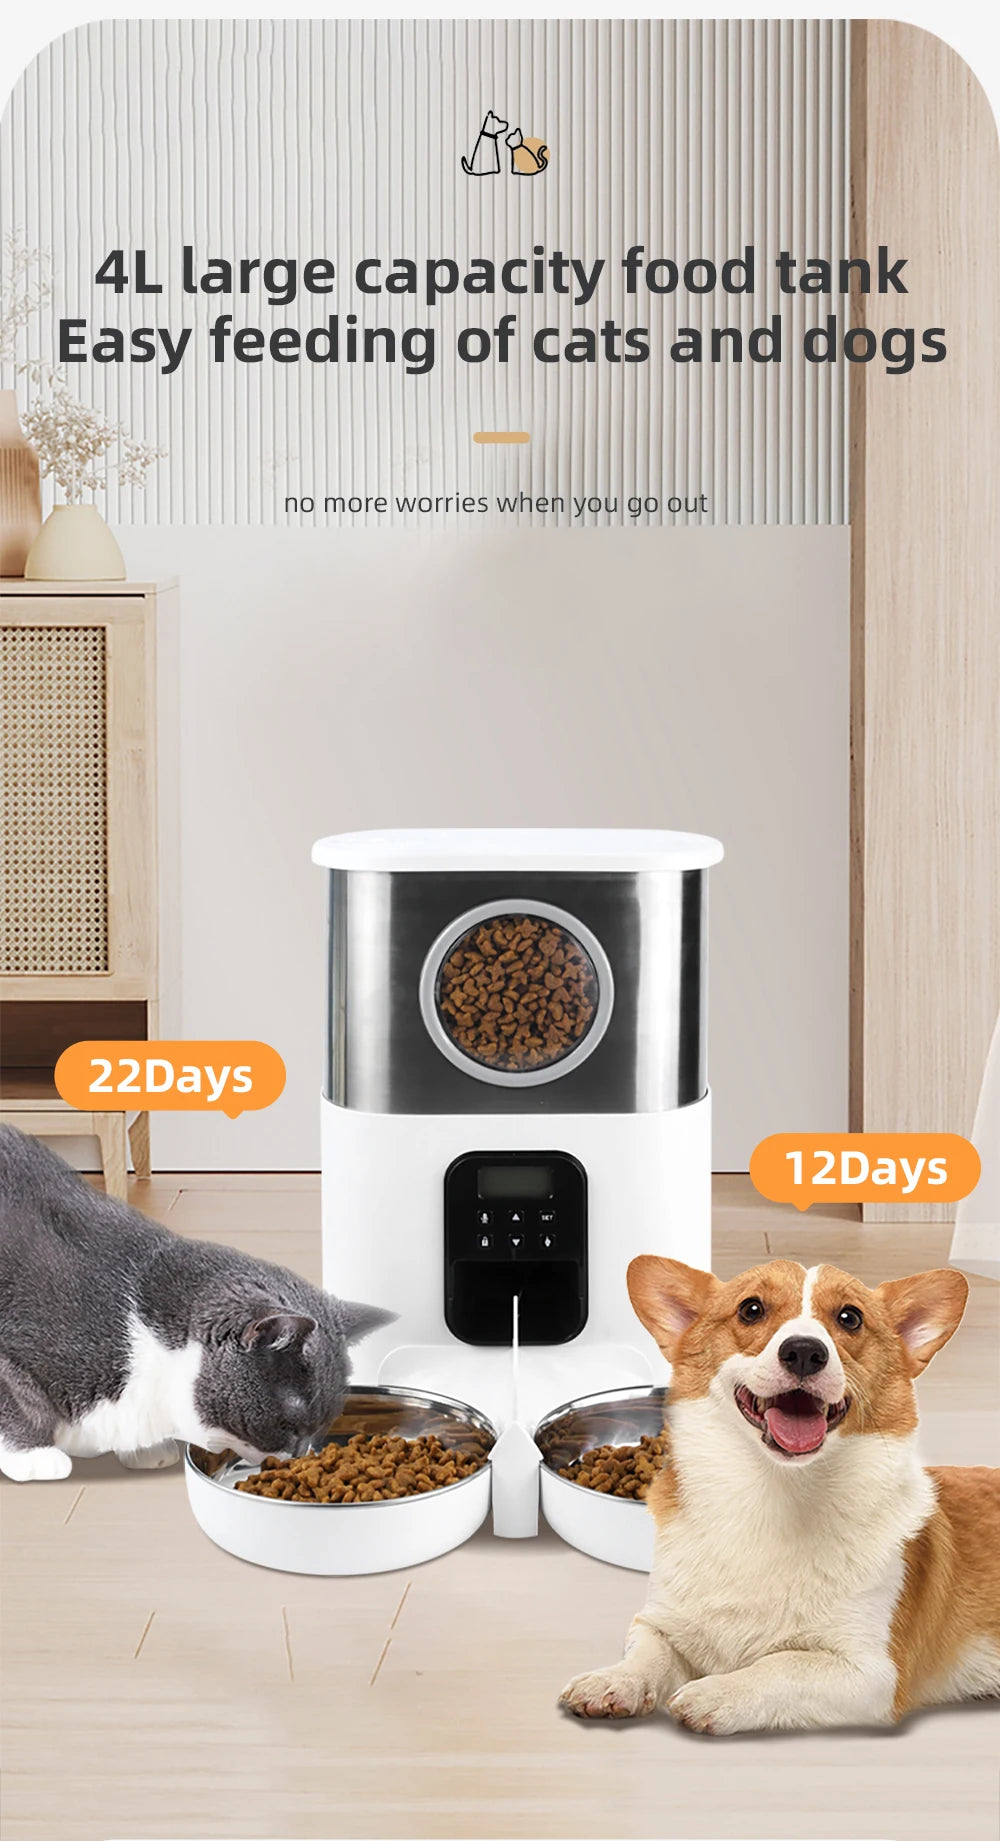 5L Stainless Steel Double Bowl Automatic Pet Feeder Food Dispenser - ozonlineshopper